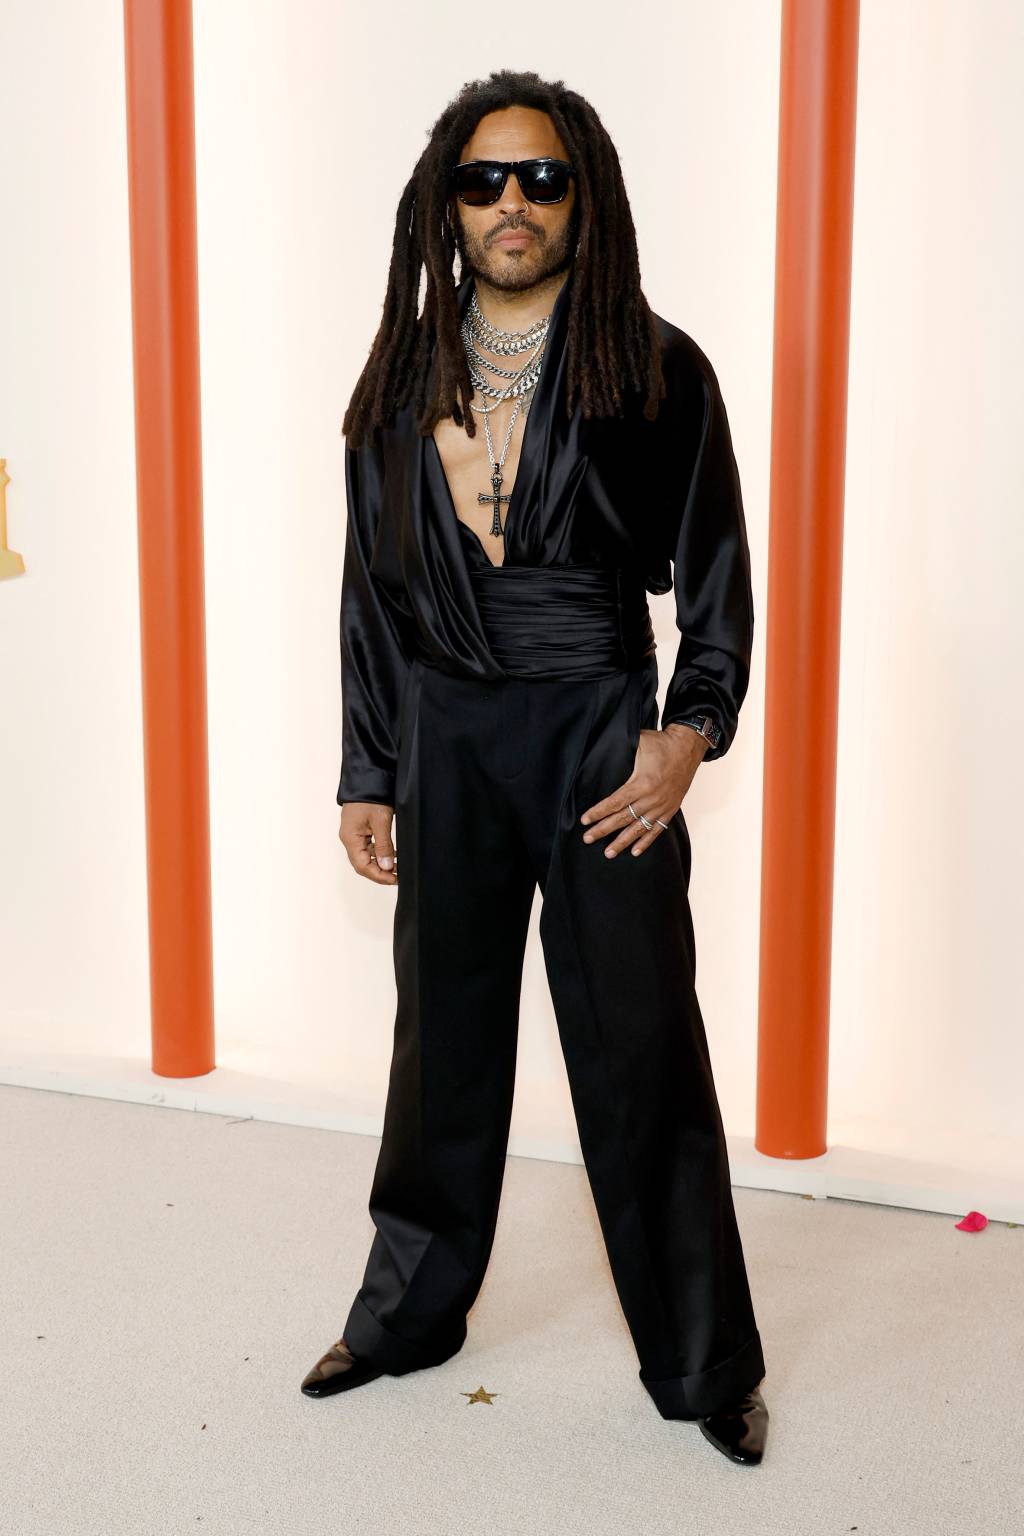 HOLLYWOOD, CALIFORNIA - MARCH 12: Lenny Kravitz attends the 95th Annual Academy Awards on March 12, 2023 in Hollywood, California. Mike Coppola/Getty Images/AFP (Photo byMike Coppola / GETTY IMAGES NORTH AMERICA / Getty Images via AFP)